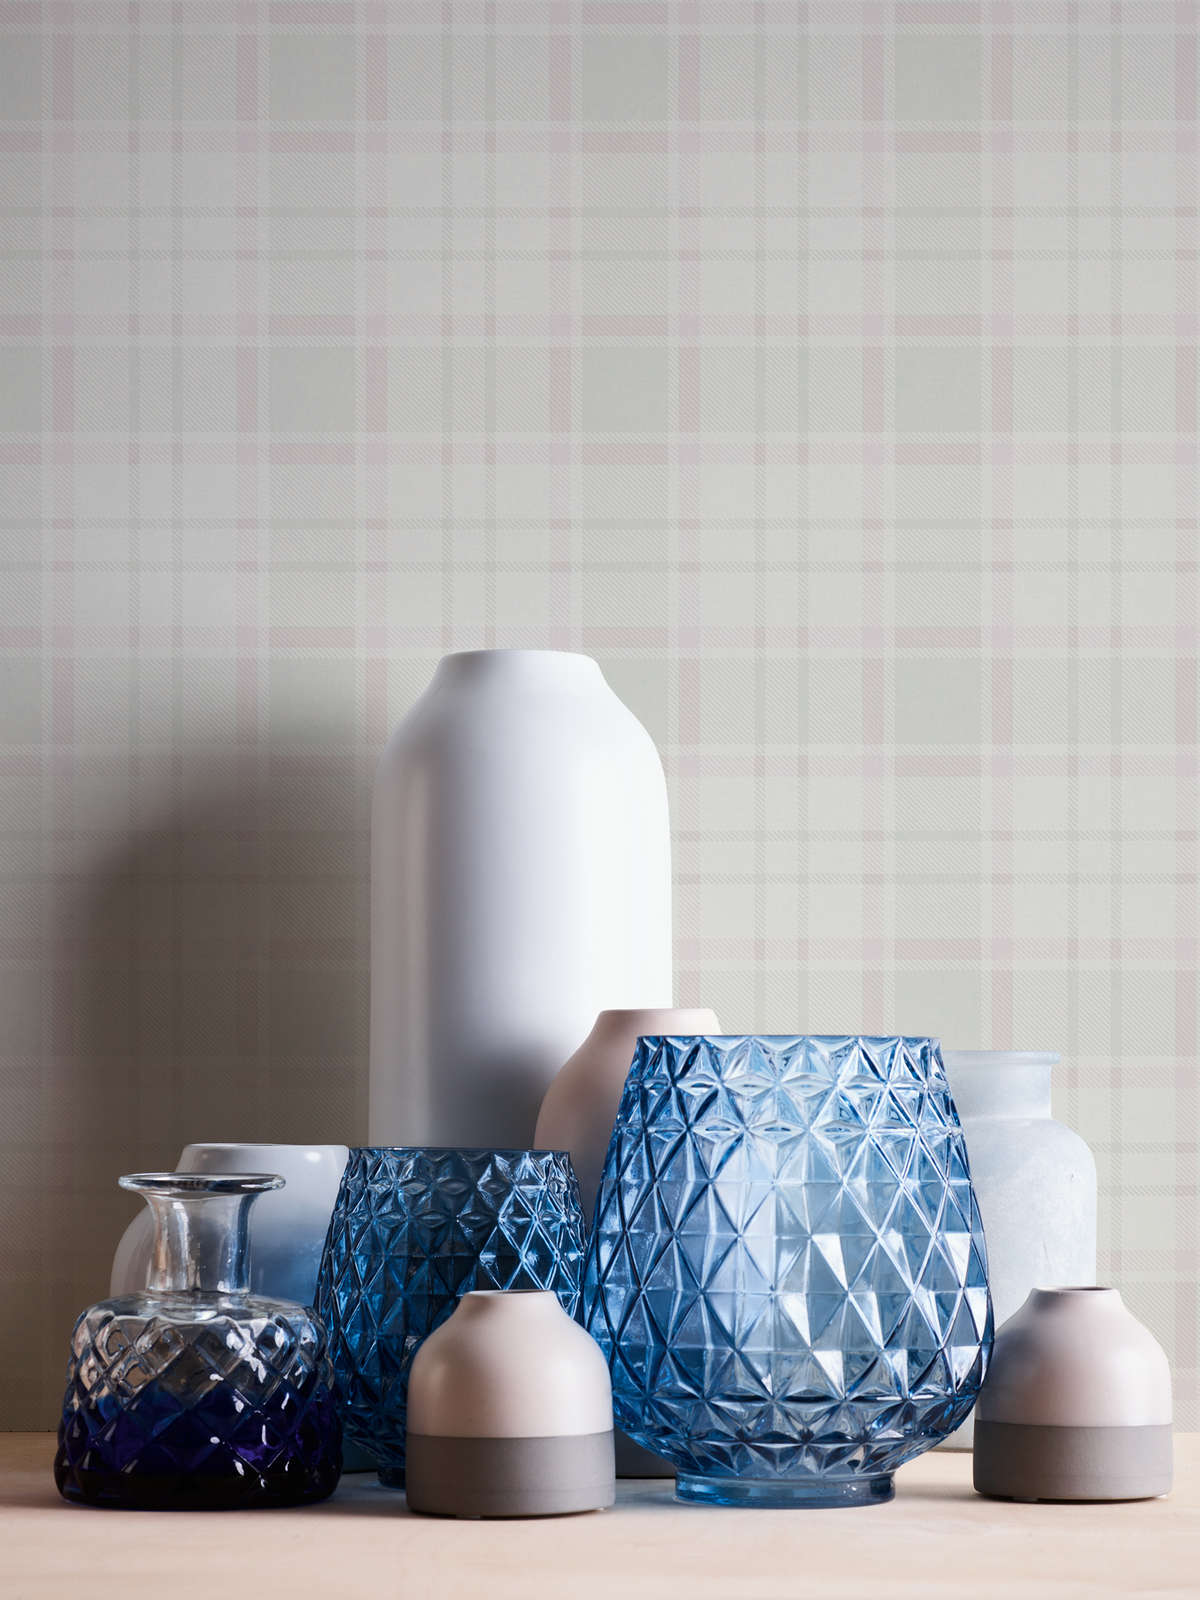             Wallpaper in chequered and country style - white, blue, grey
        